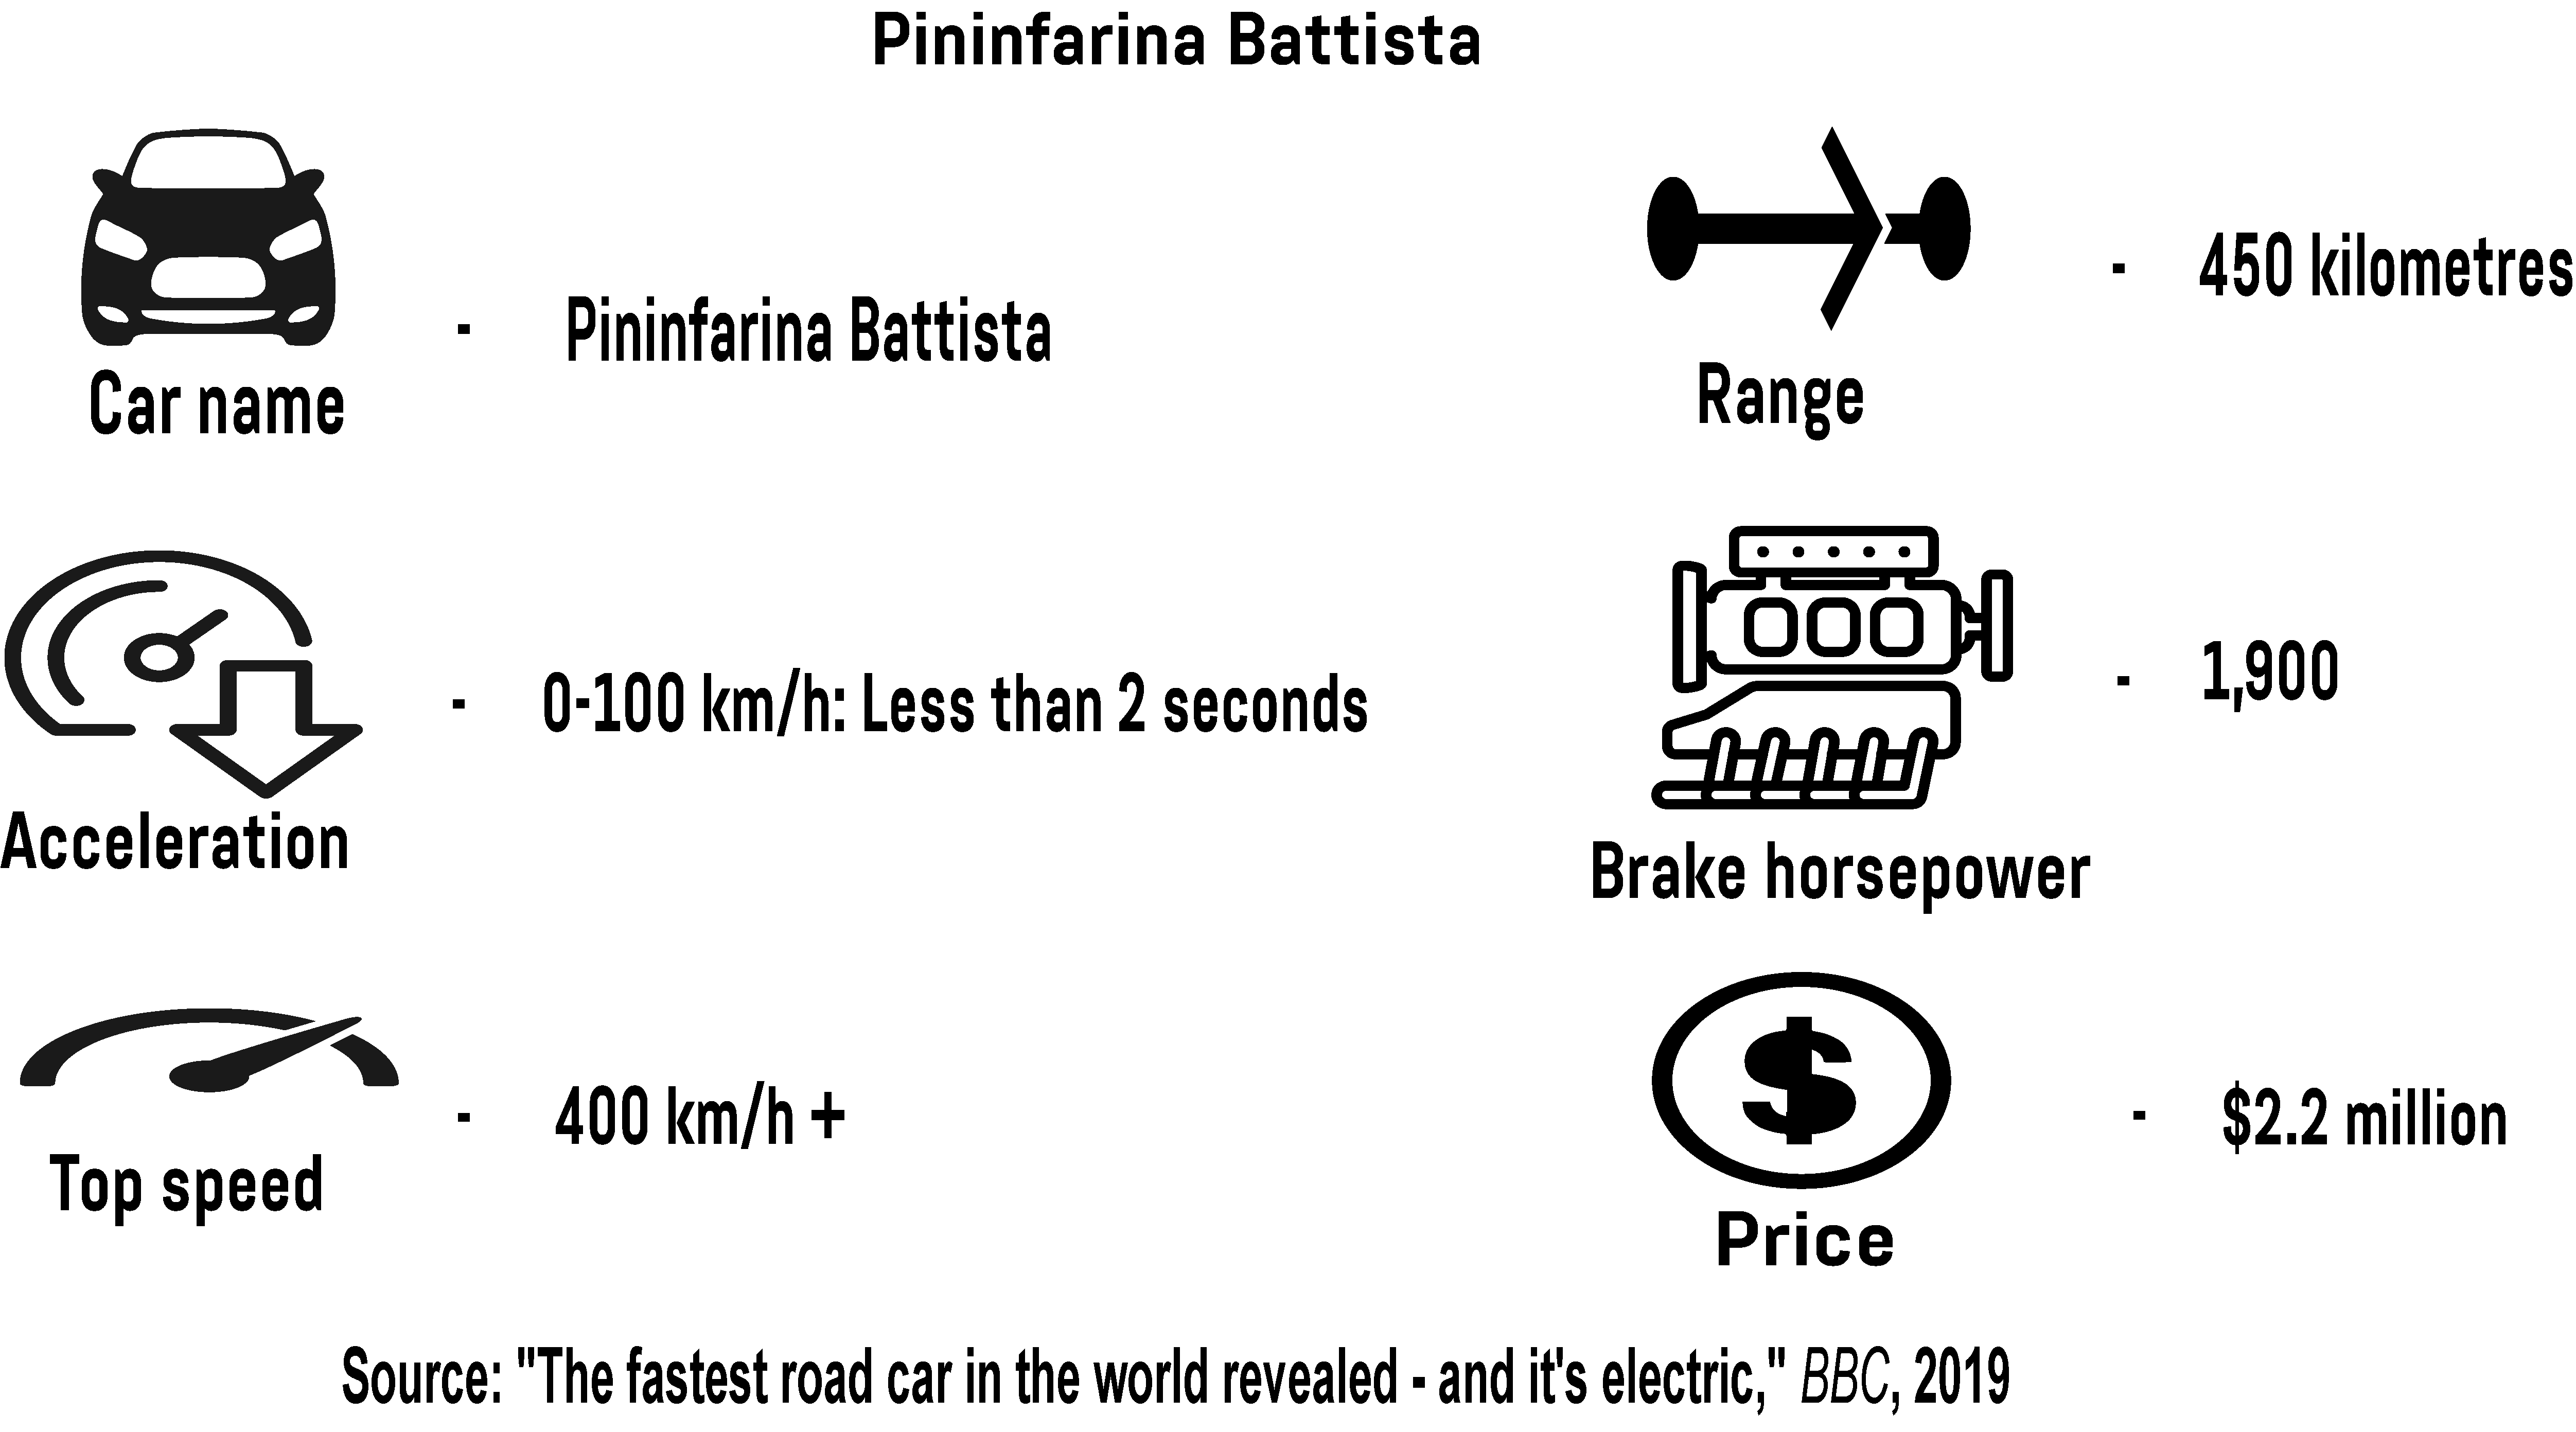 An infographic showing the performance metrics of the Pininfarina Battista electric car